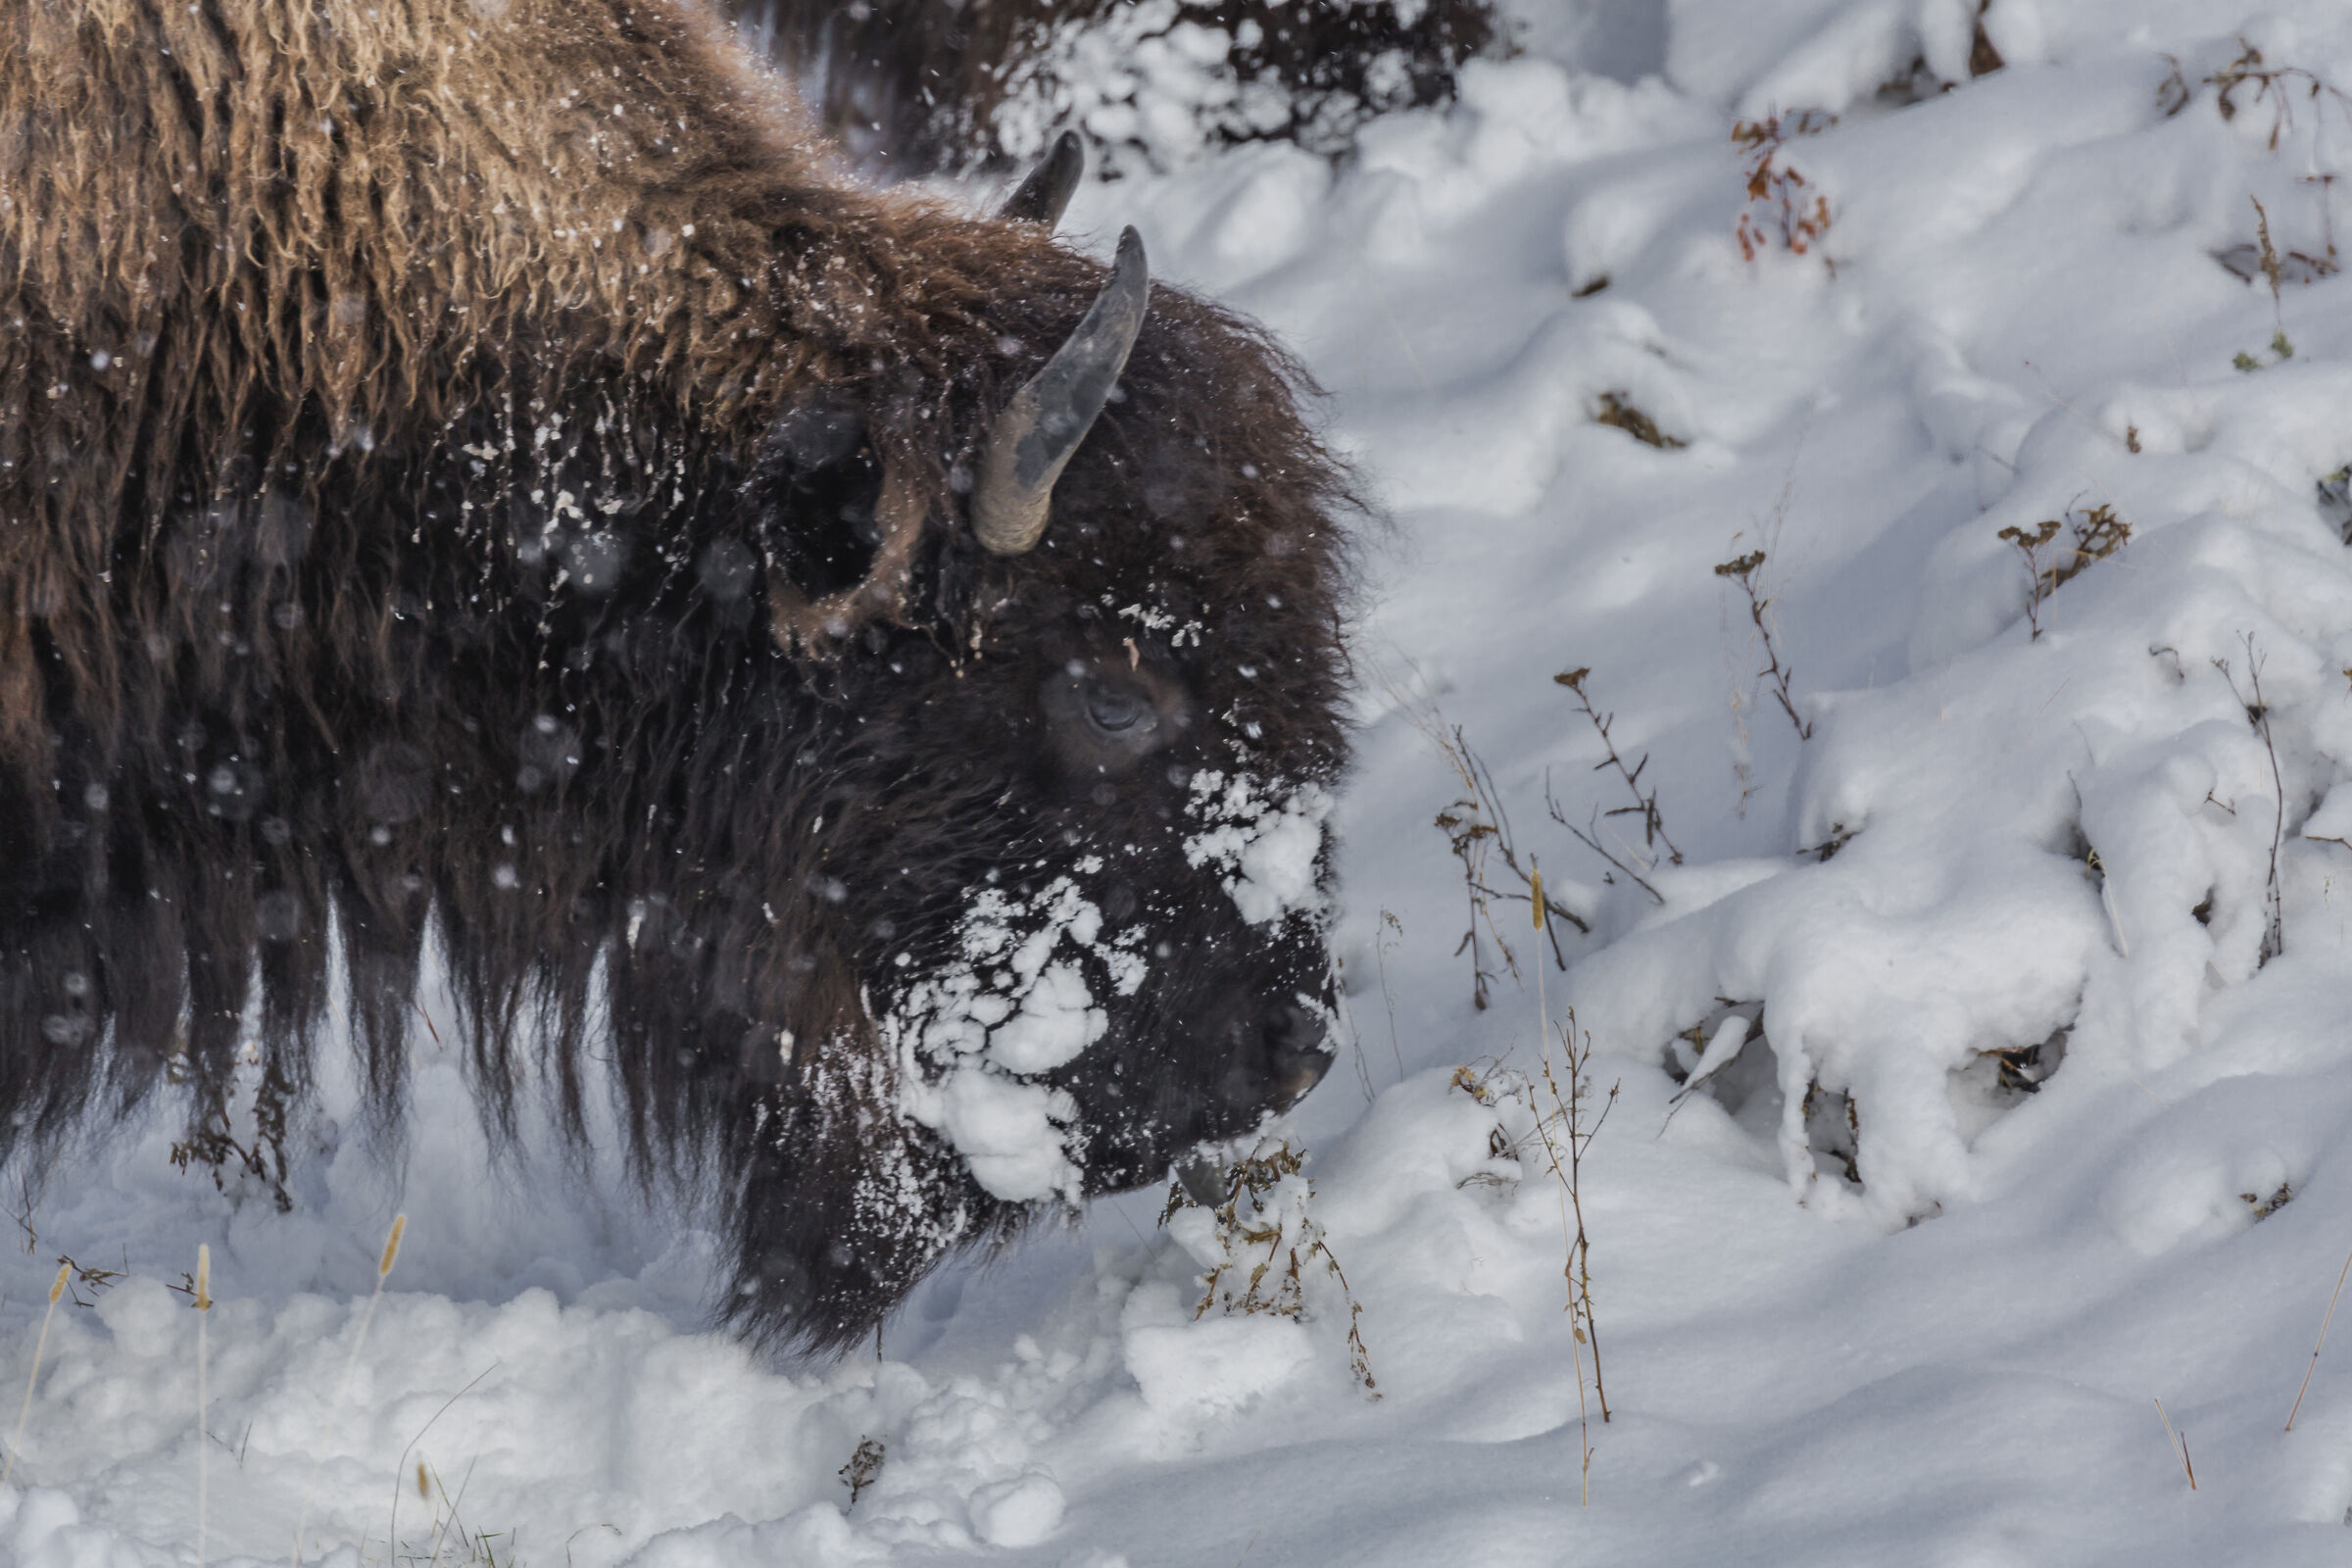 Bison in the snow...